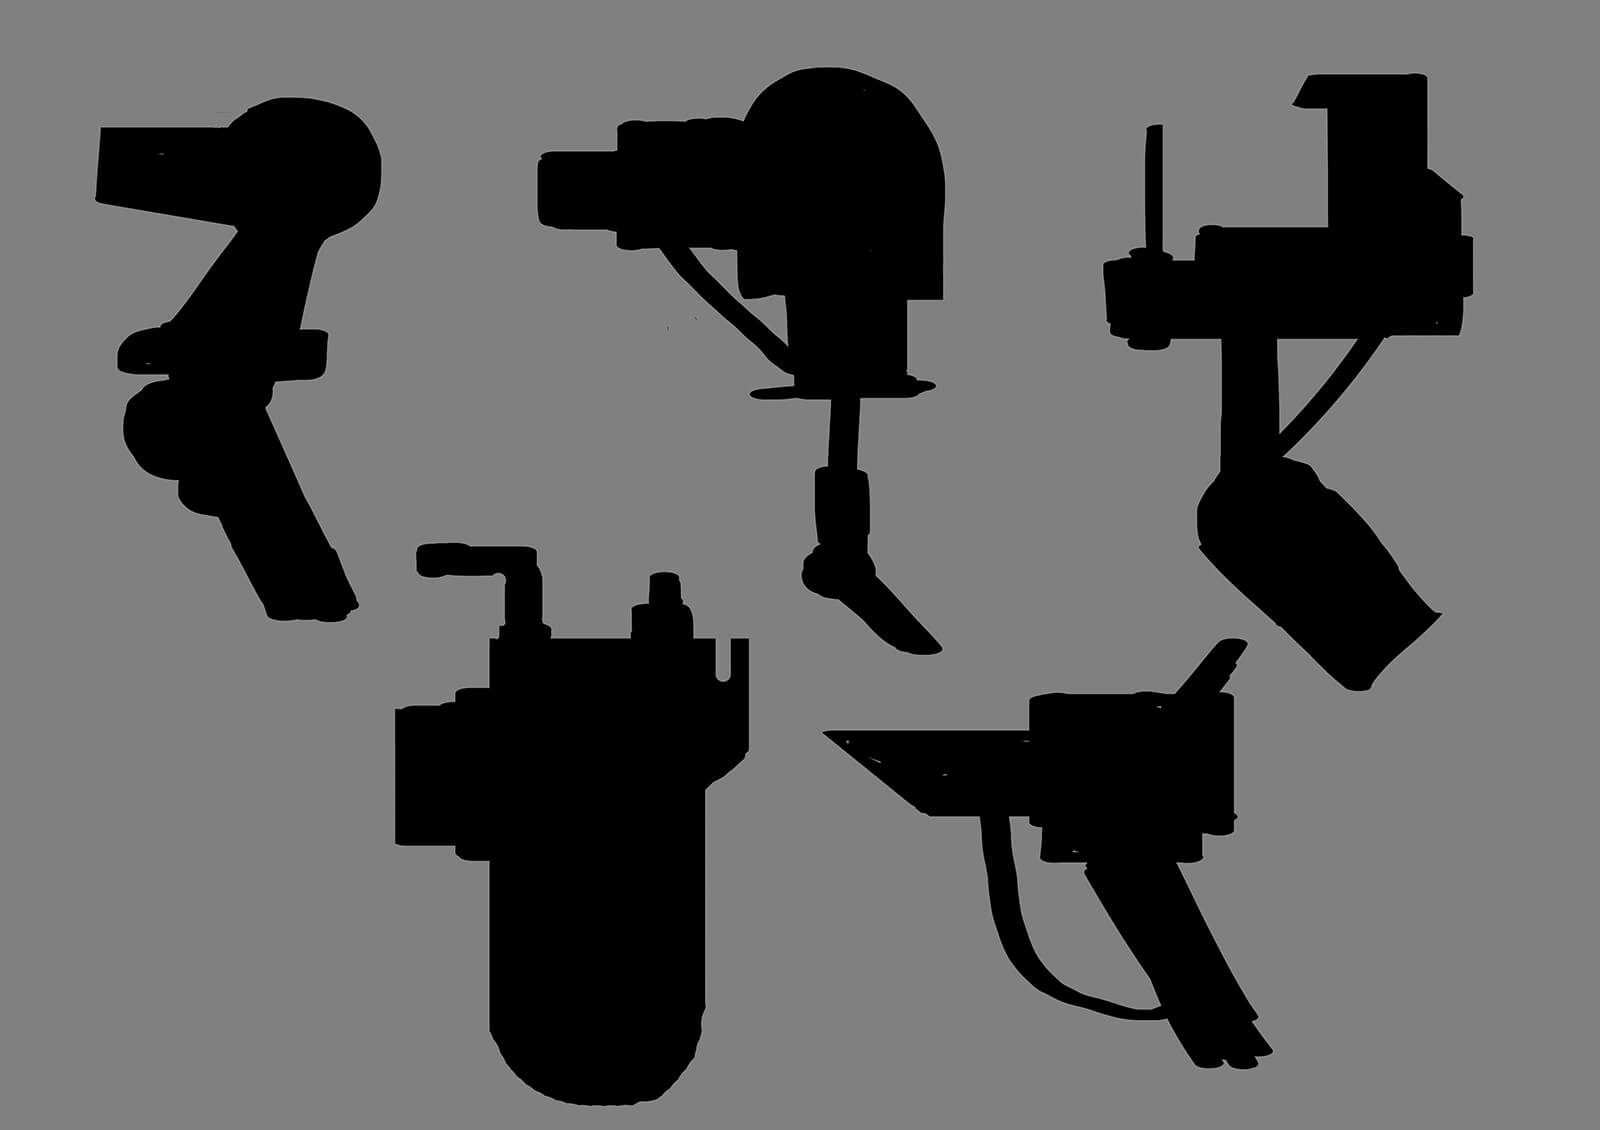 Silhouette sketches of various industrial equipment as seen in the film Deadly Delivery